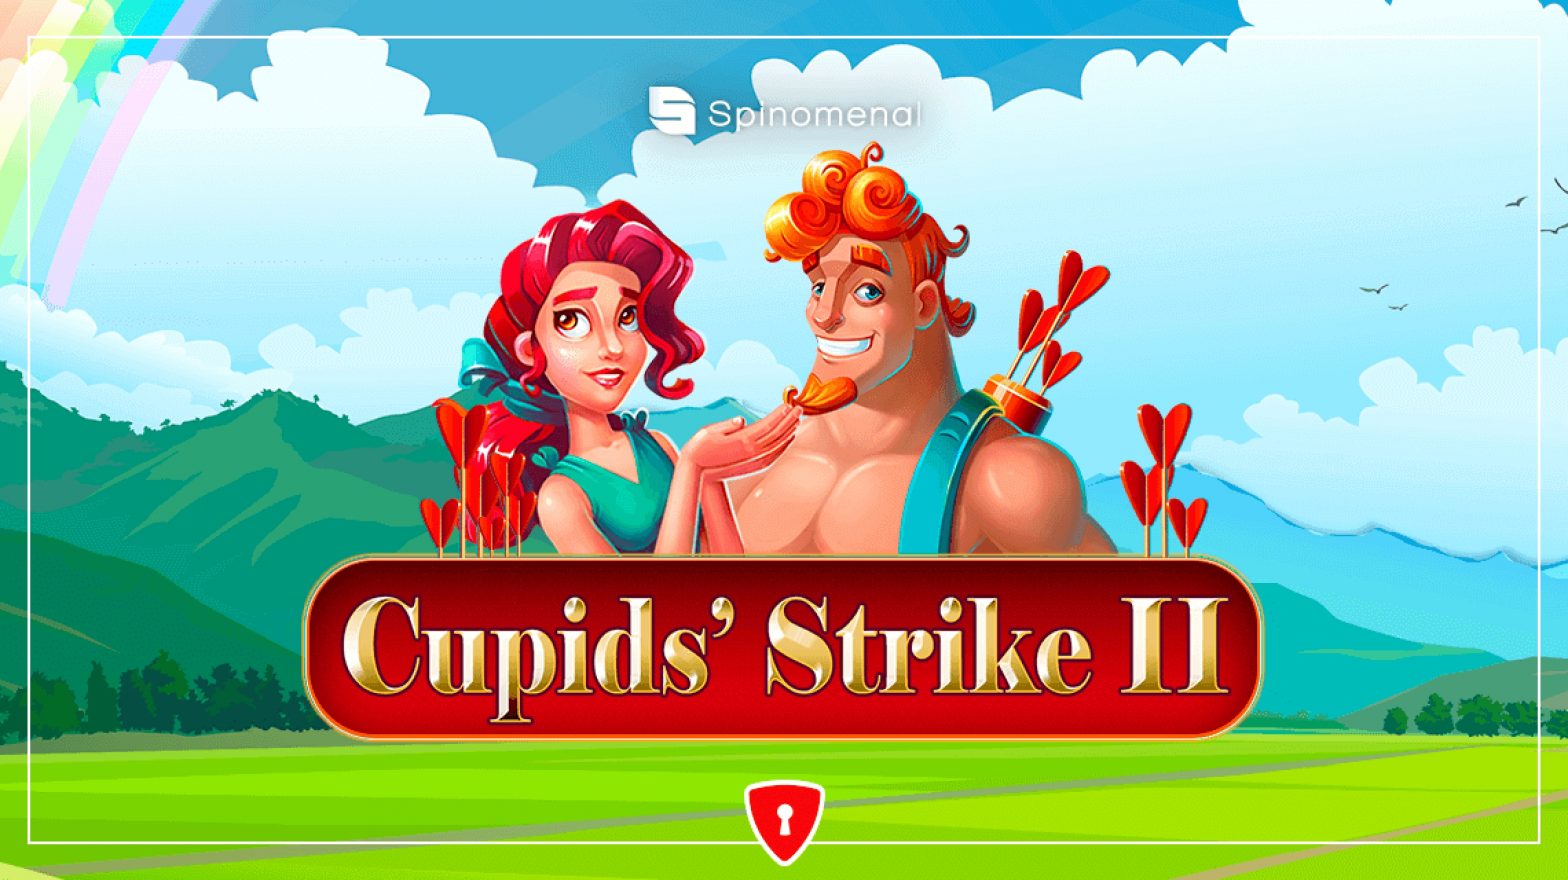 The CUPID online slot from Endorphina